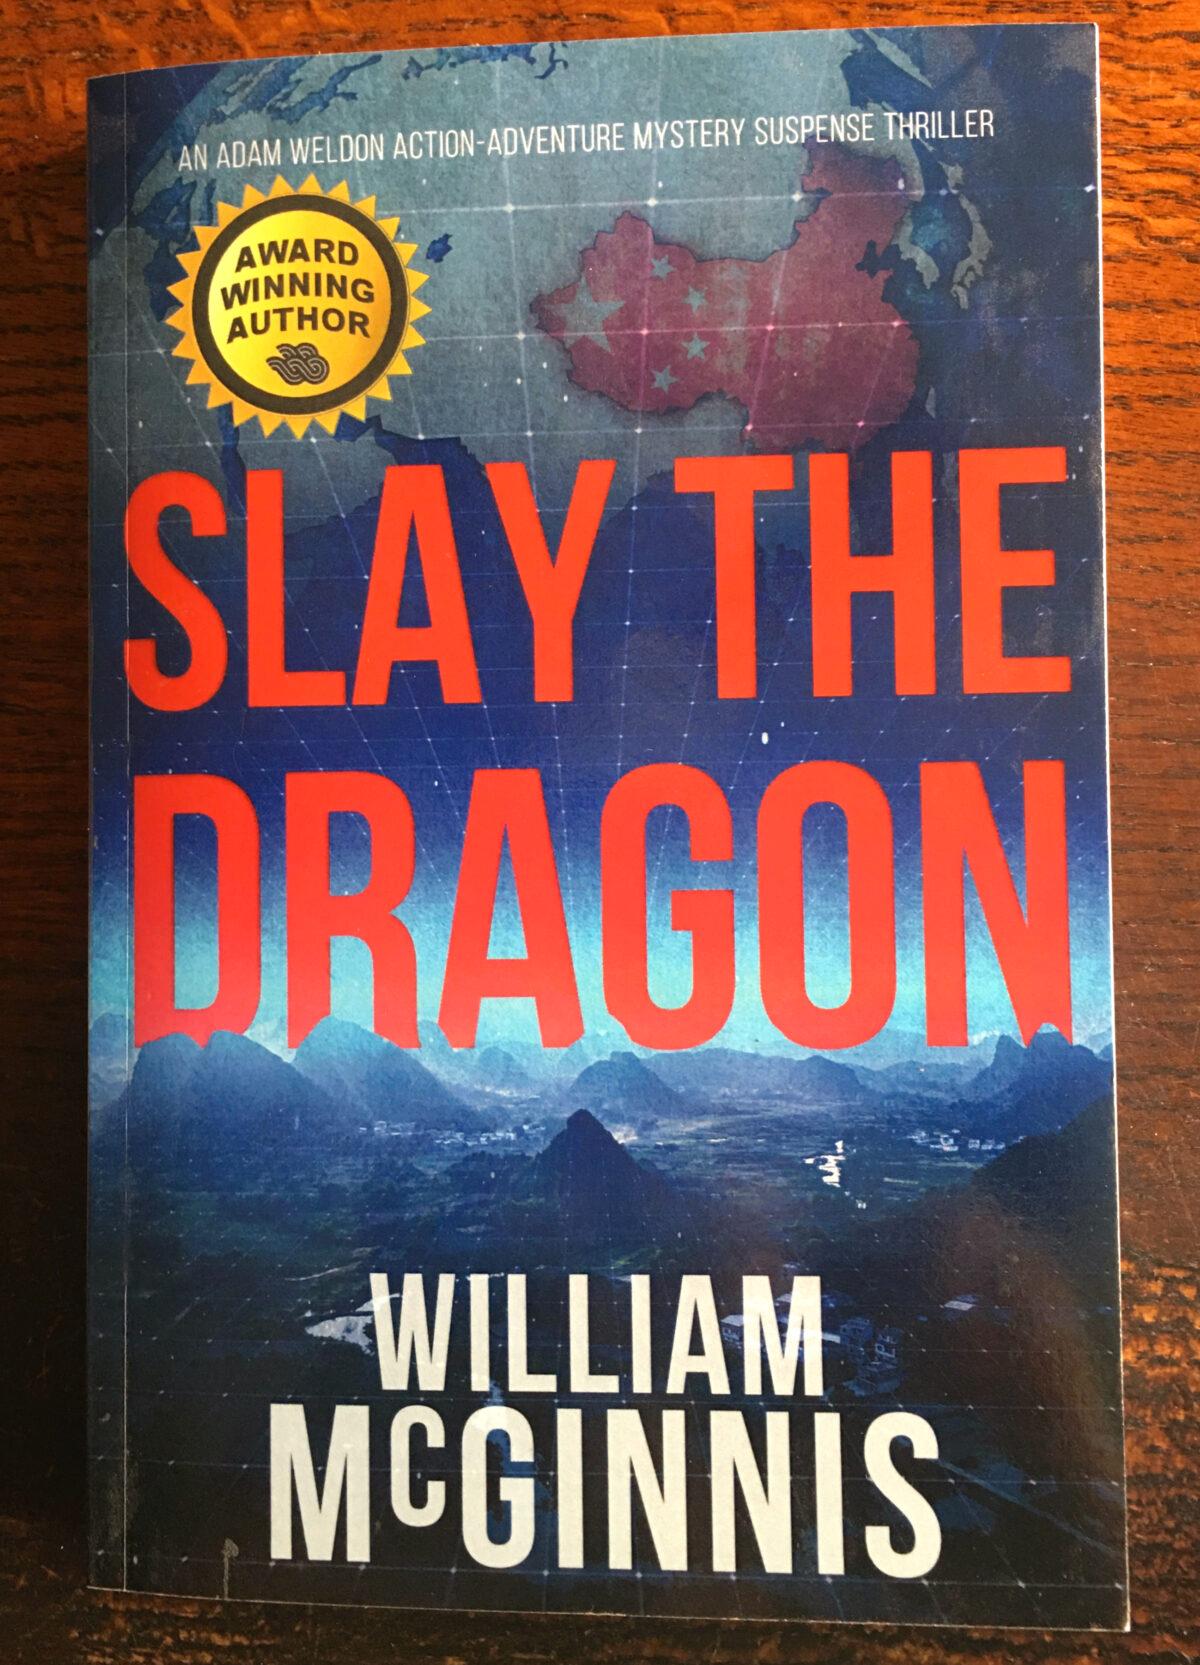 The 2022 book “Slay the Dragon” by William McGinnis. (Courtesy of John Moorlach)